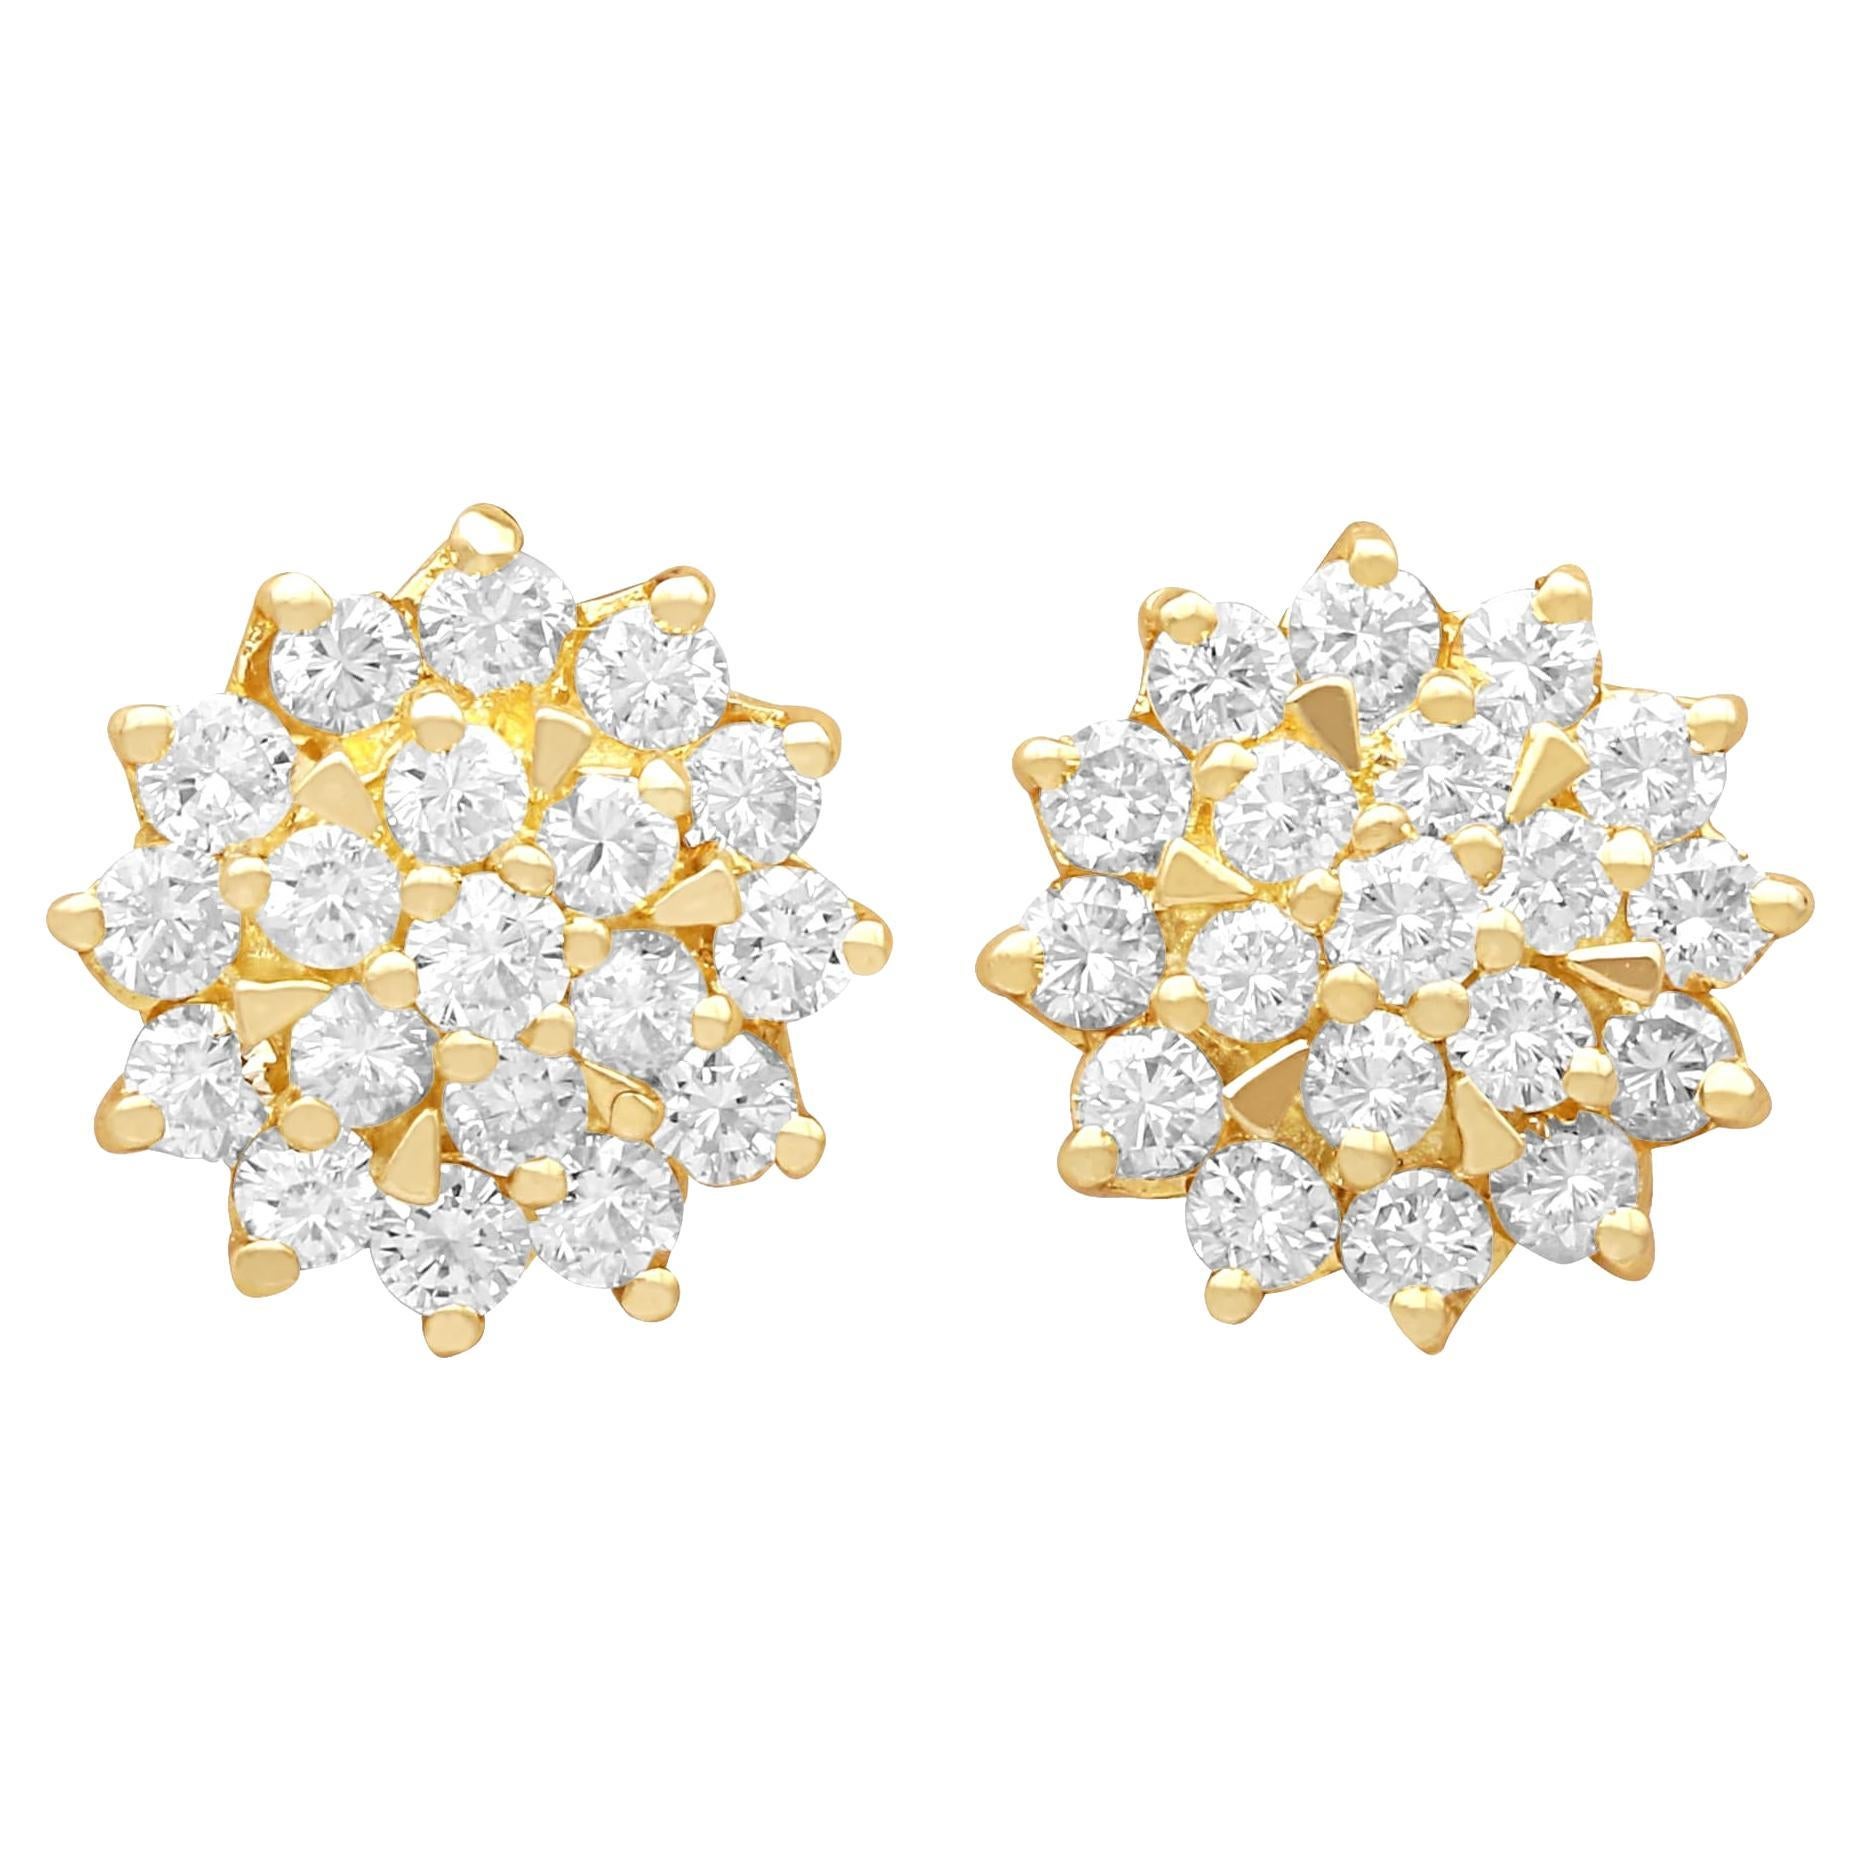 Vintage 1.00 Carat Diamond and 14k Yellow Gold Cluster Stud Earrings For Sale